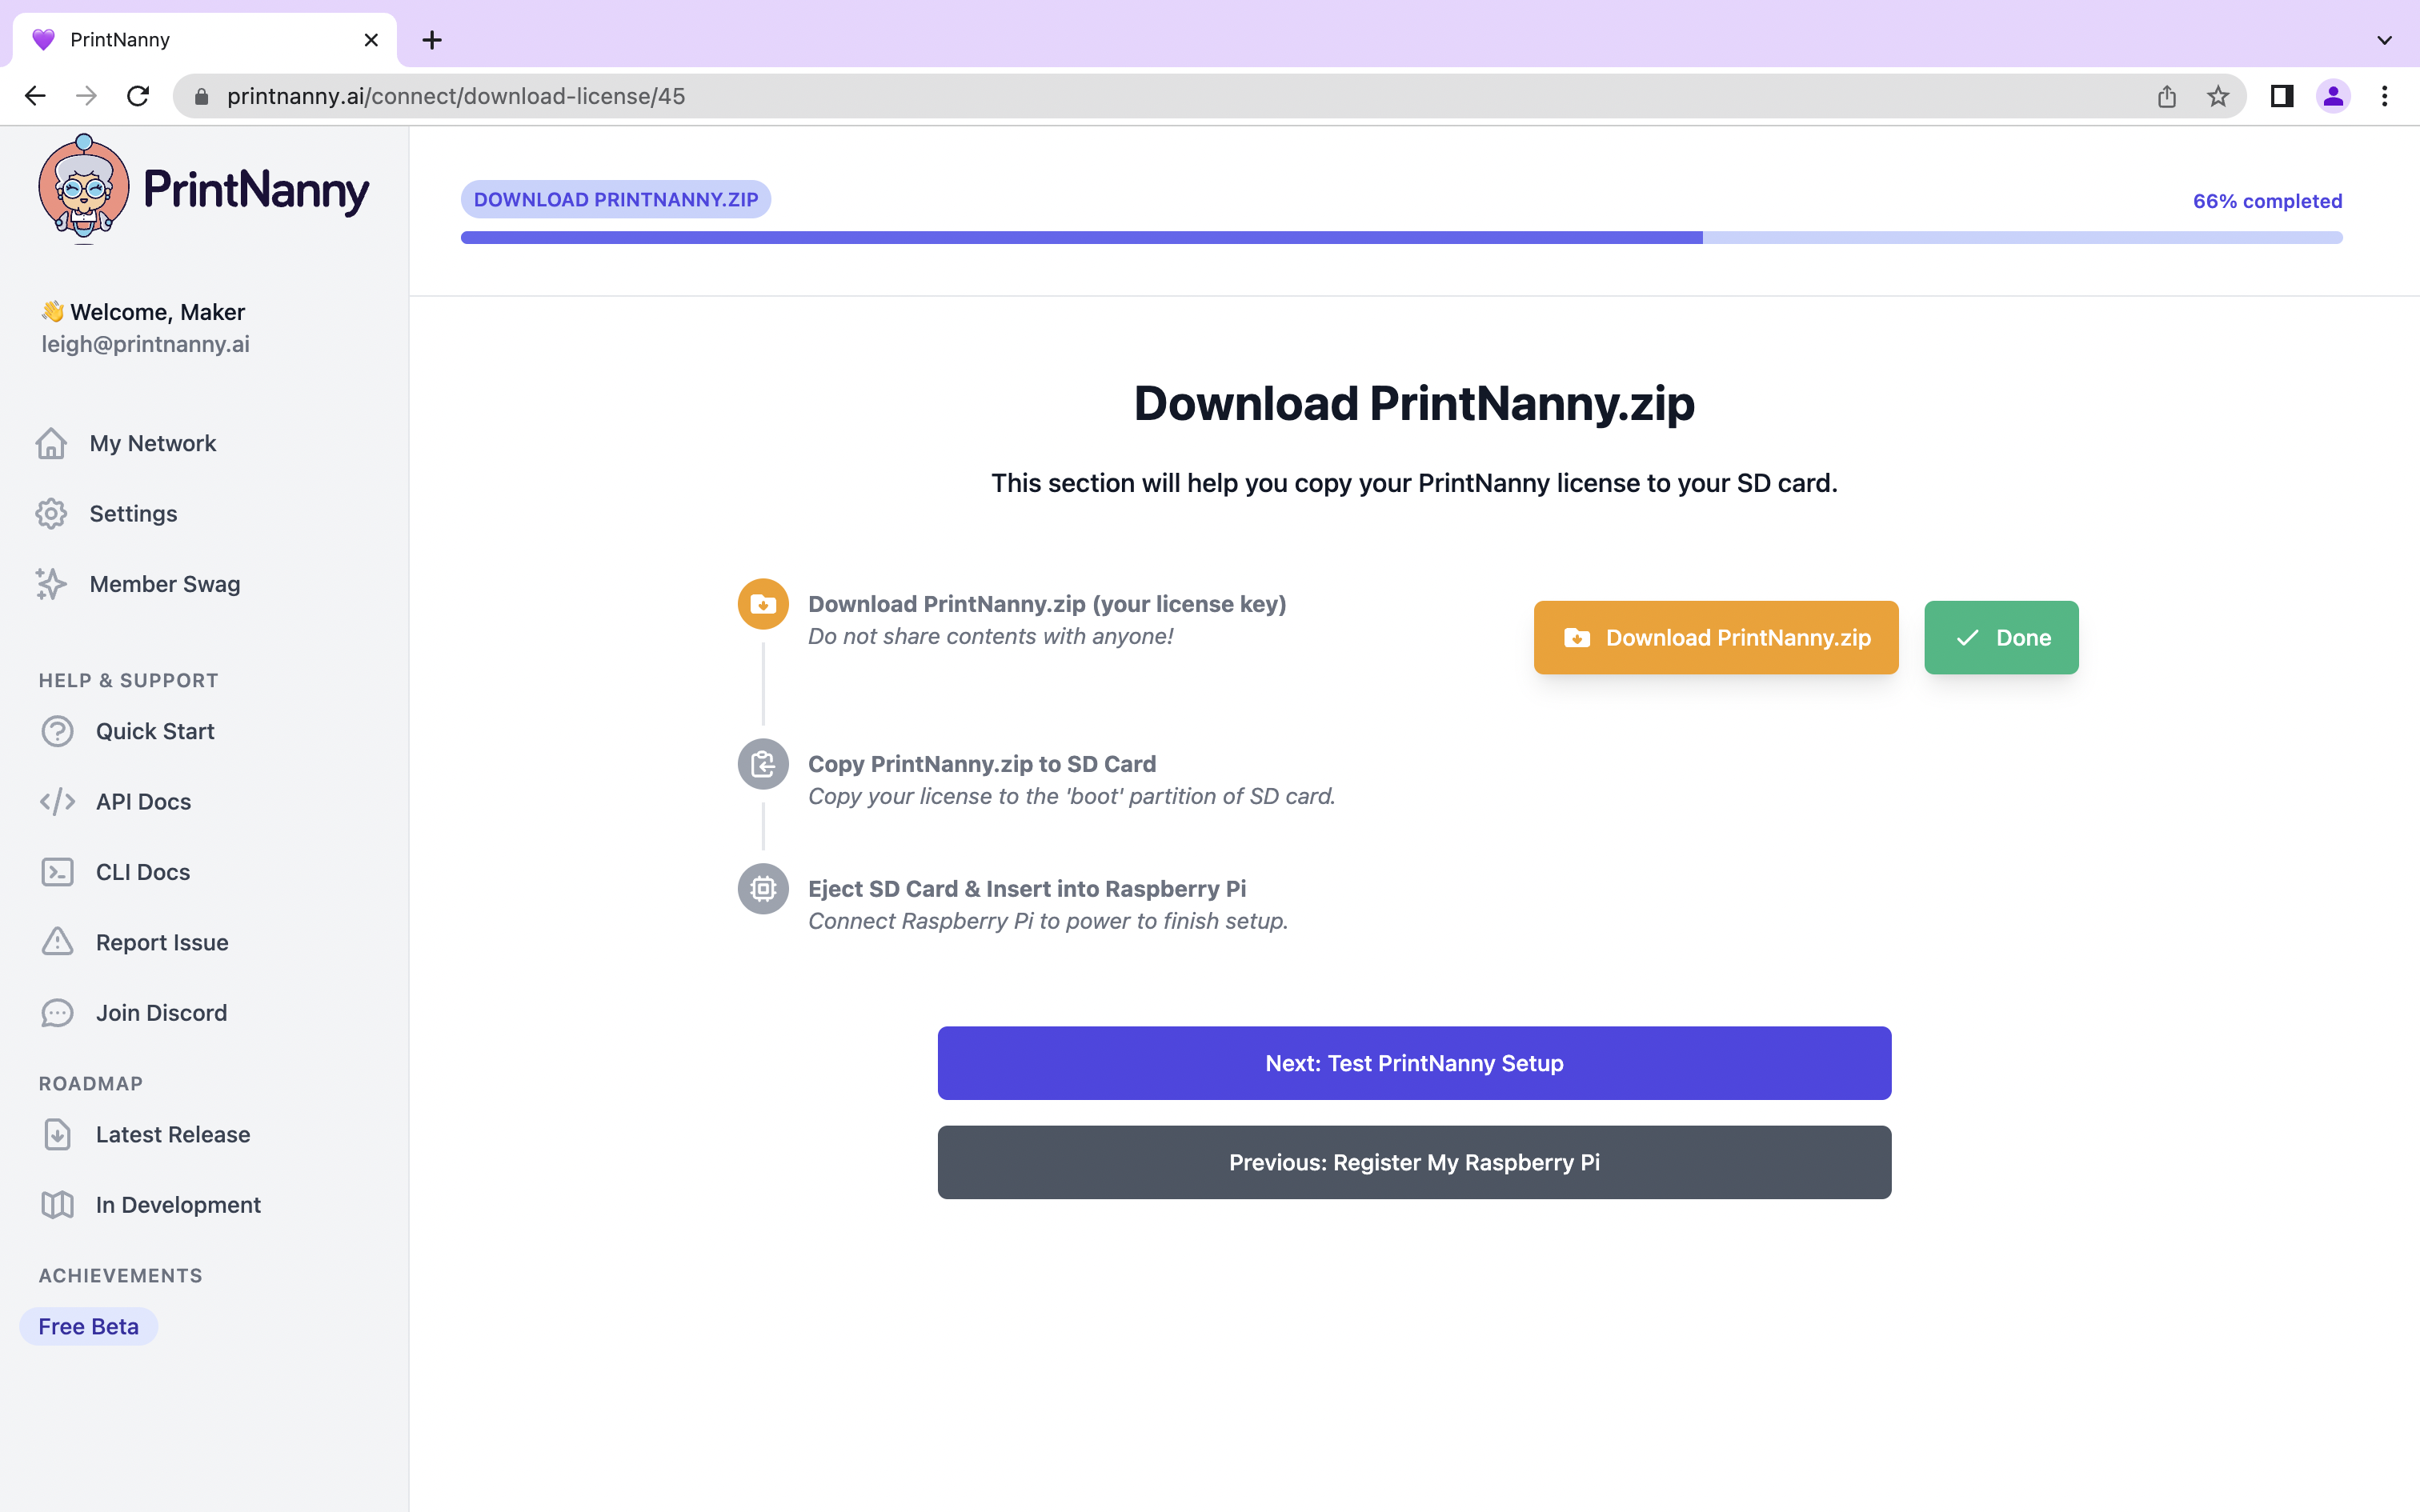 PrintNanny OS now provides a setup wizard for easy installation